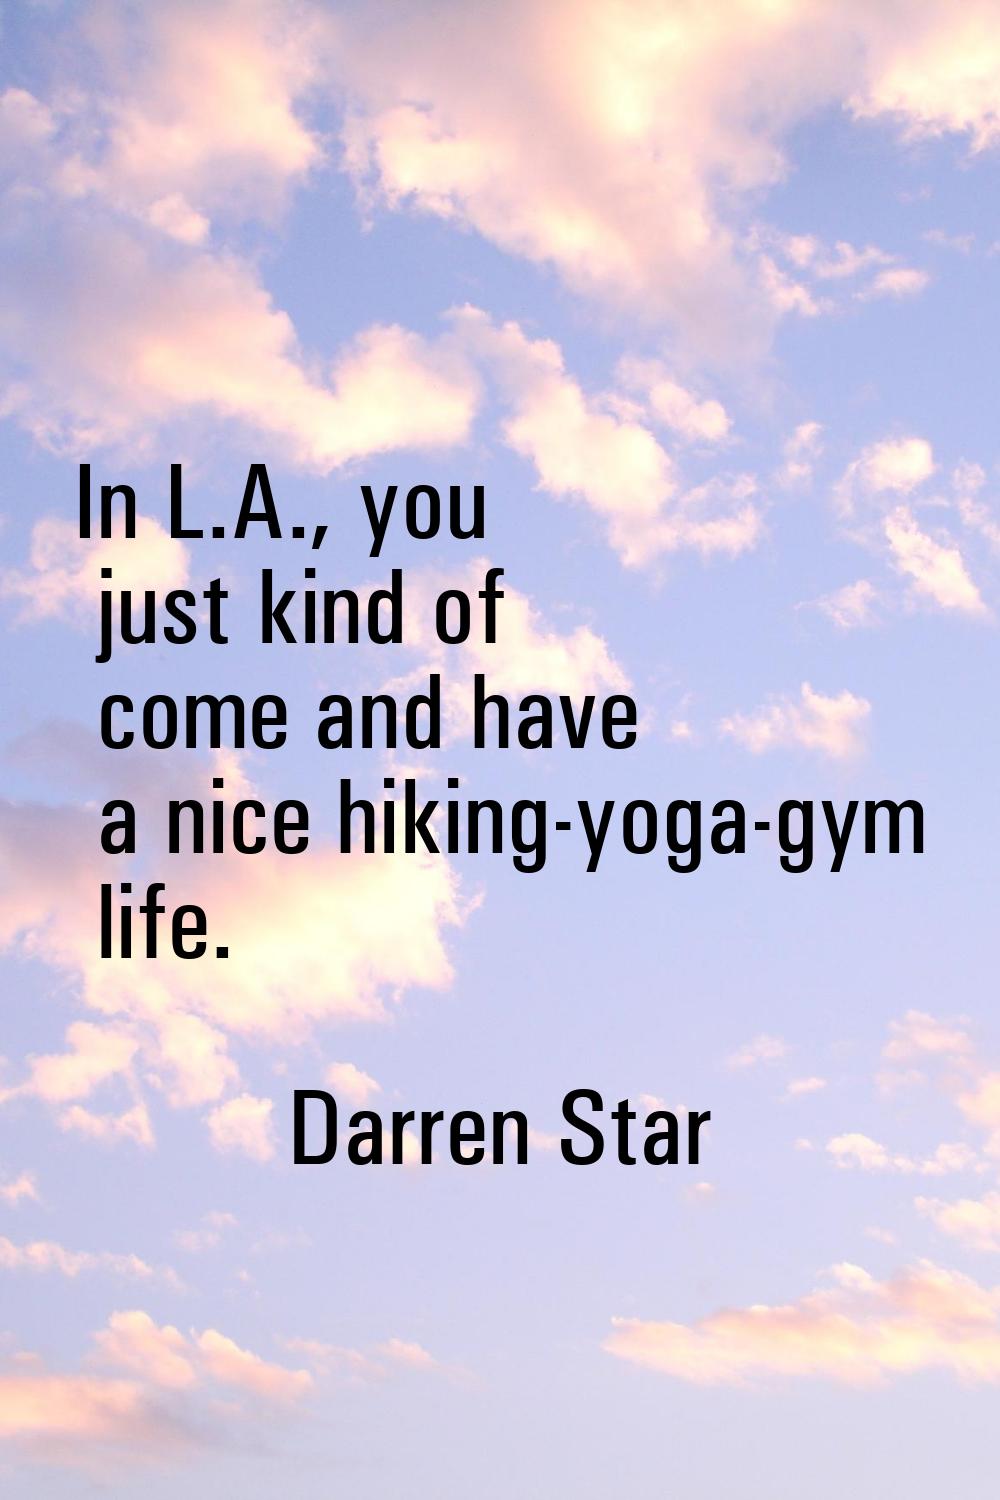 In L.A., you just kind of come and have a nice hiking-yoga-gym life.